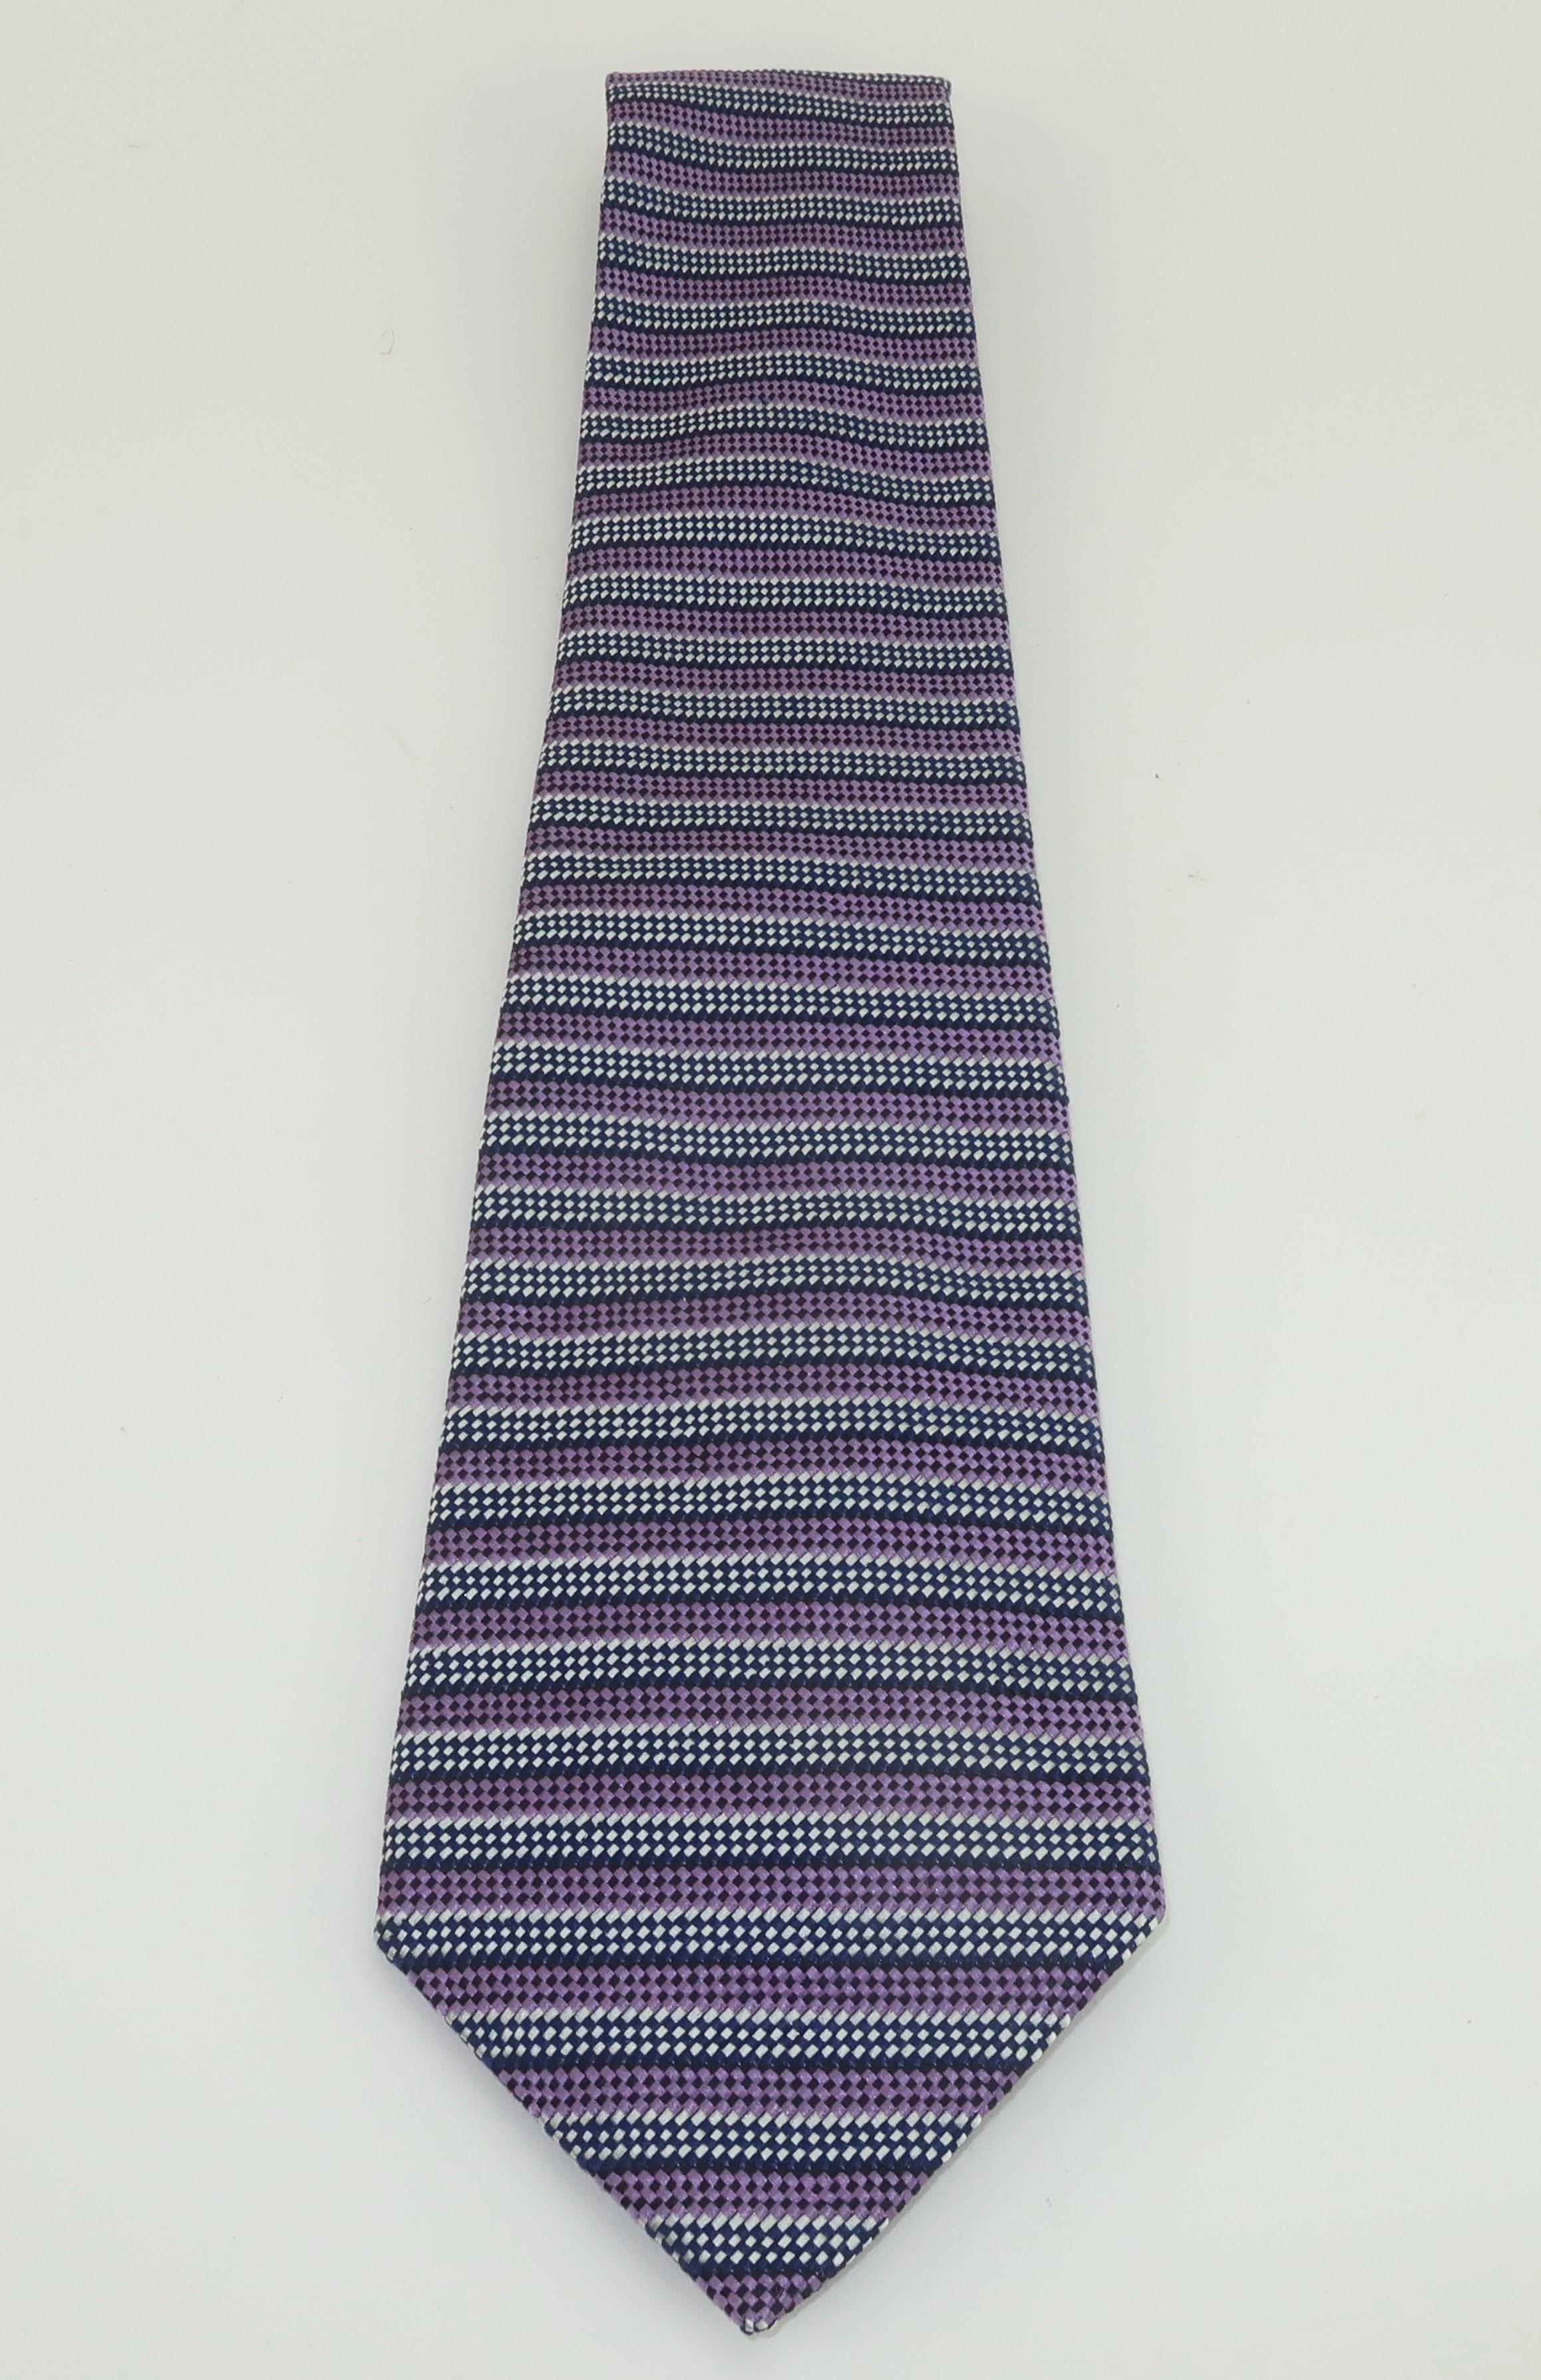 A favorite of both James Bond and the former Prince of Wales, Turnbull & Asser silk neck ties are the ultimate in English men's fashions.  This blue and purple striped tie is from the estate of Carl Sanders, Governor of Georgia in the 1960's who was